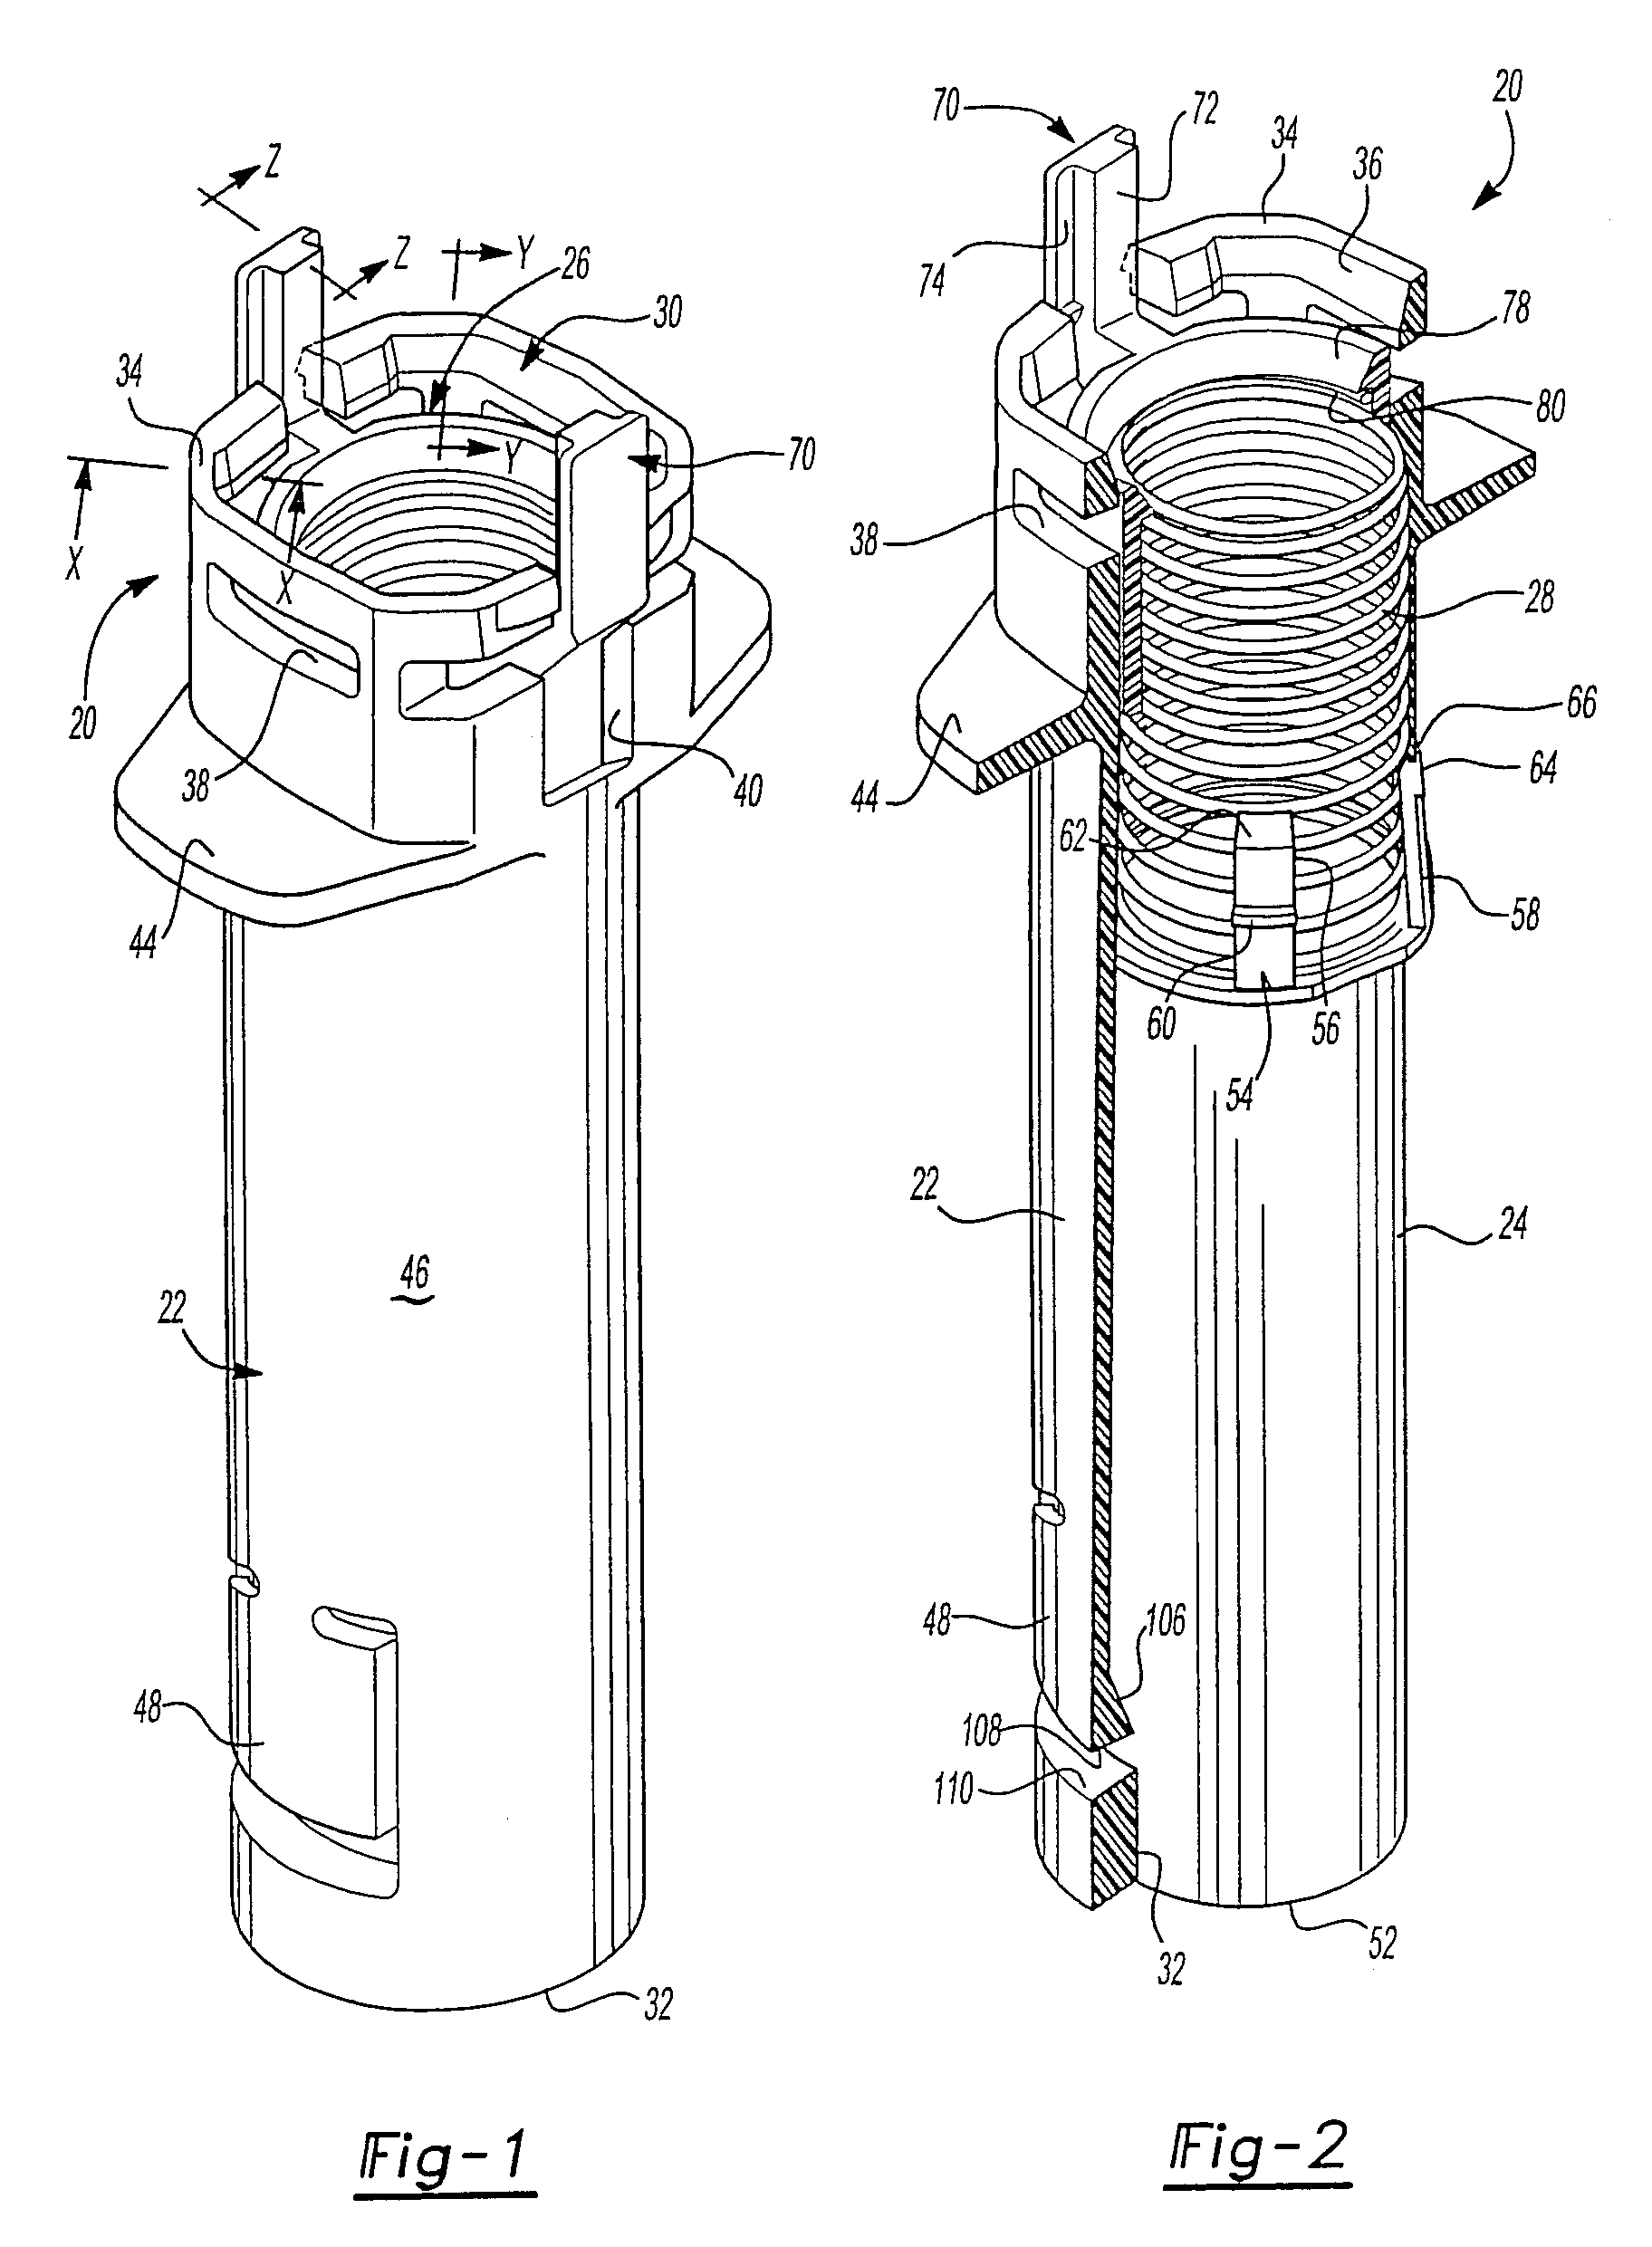 Passive safety shield system for injection devices